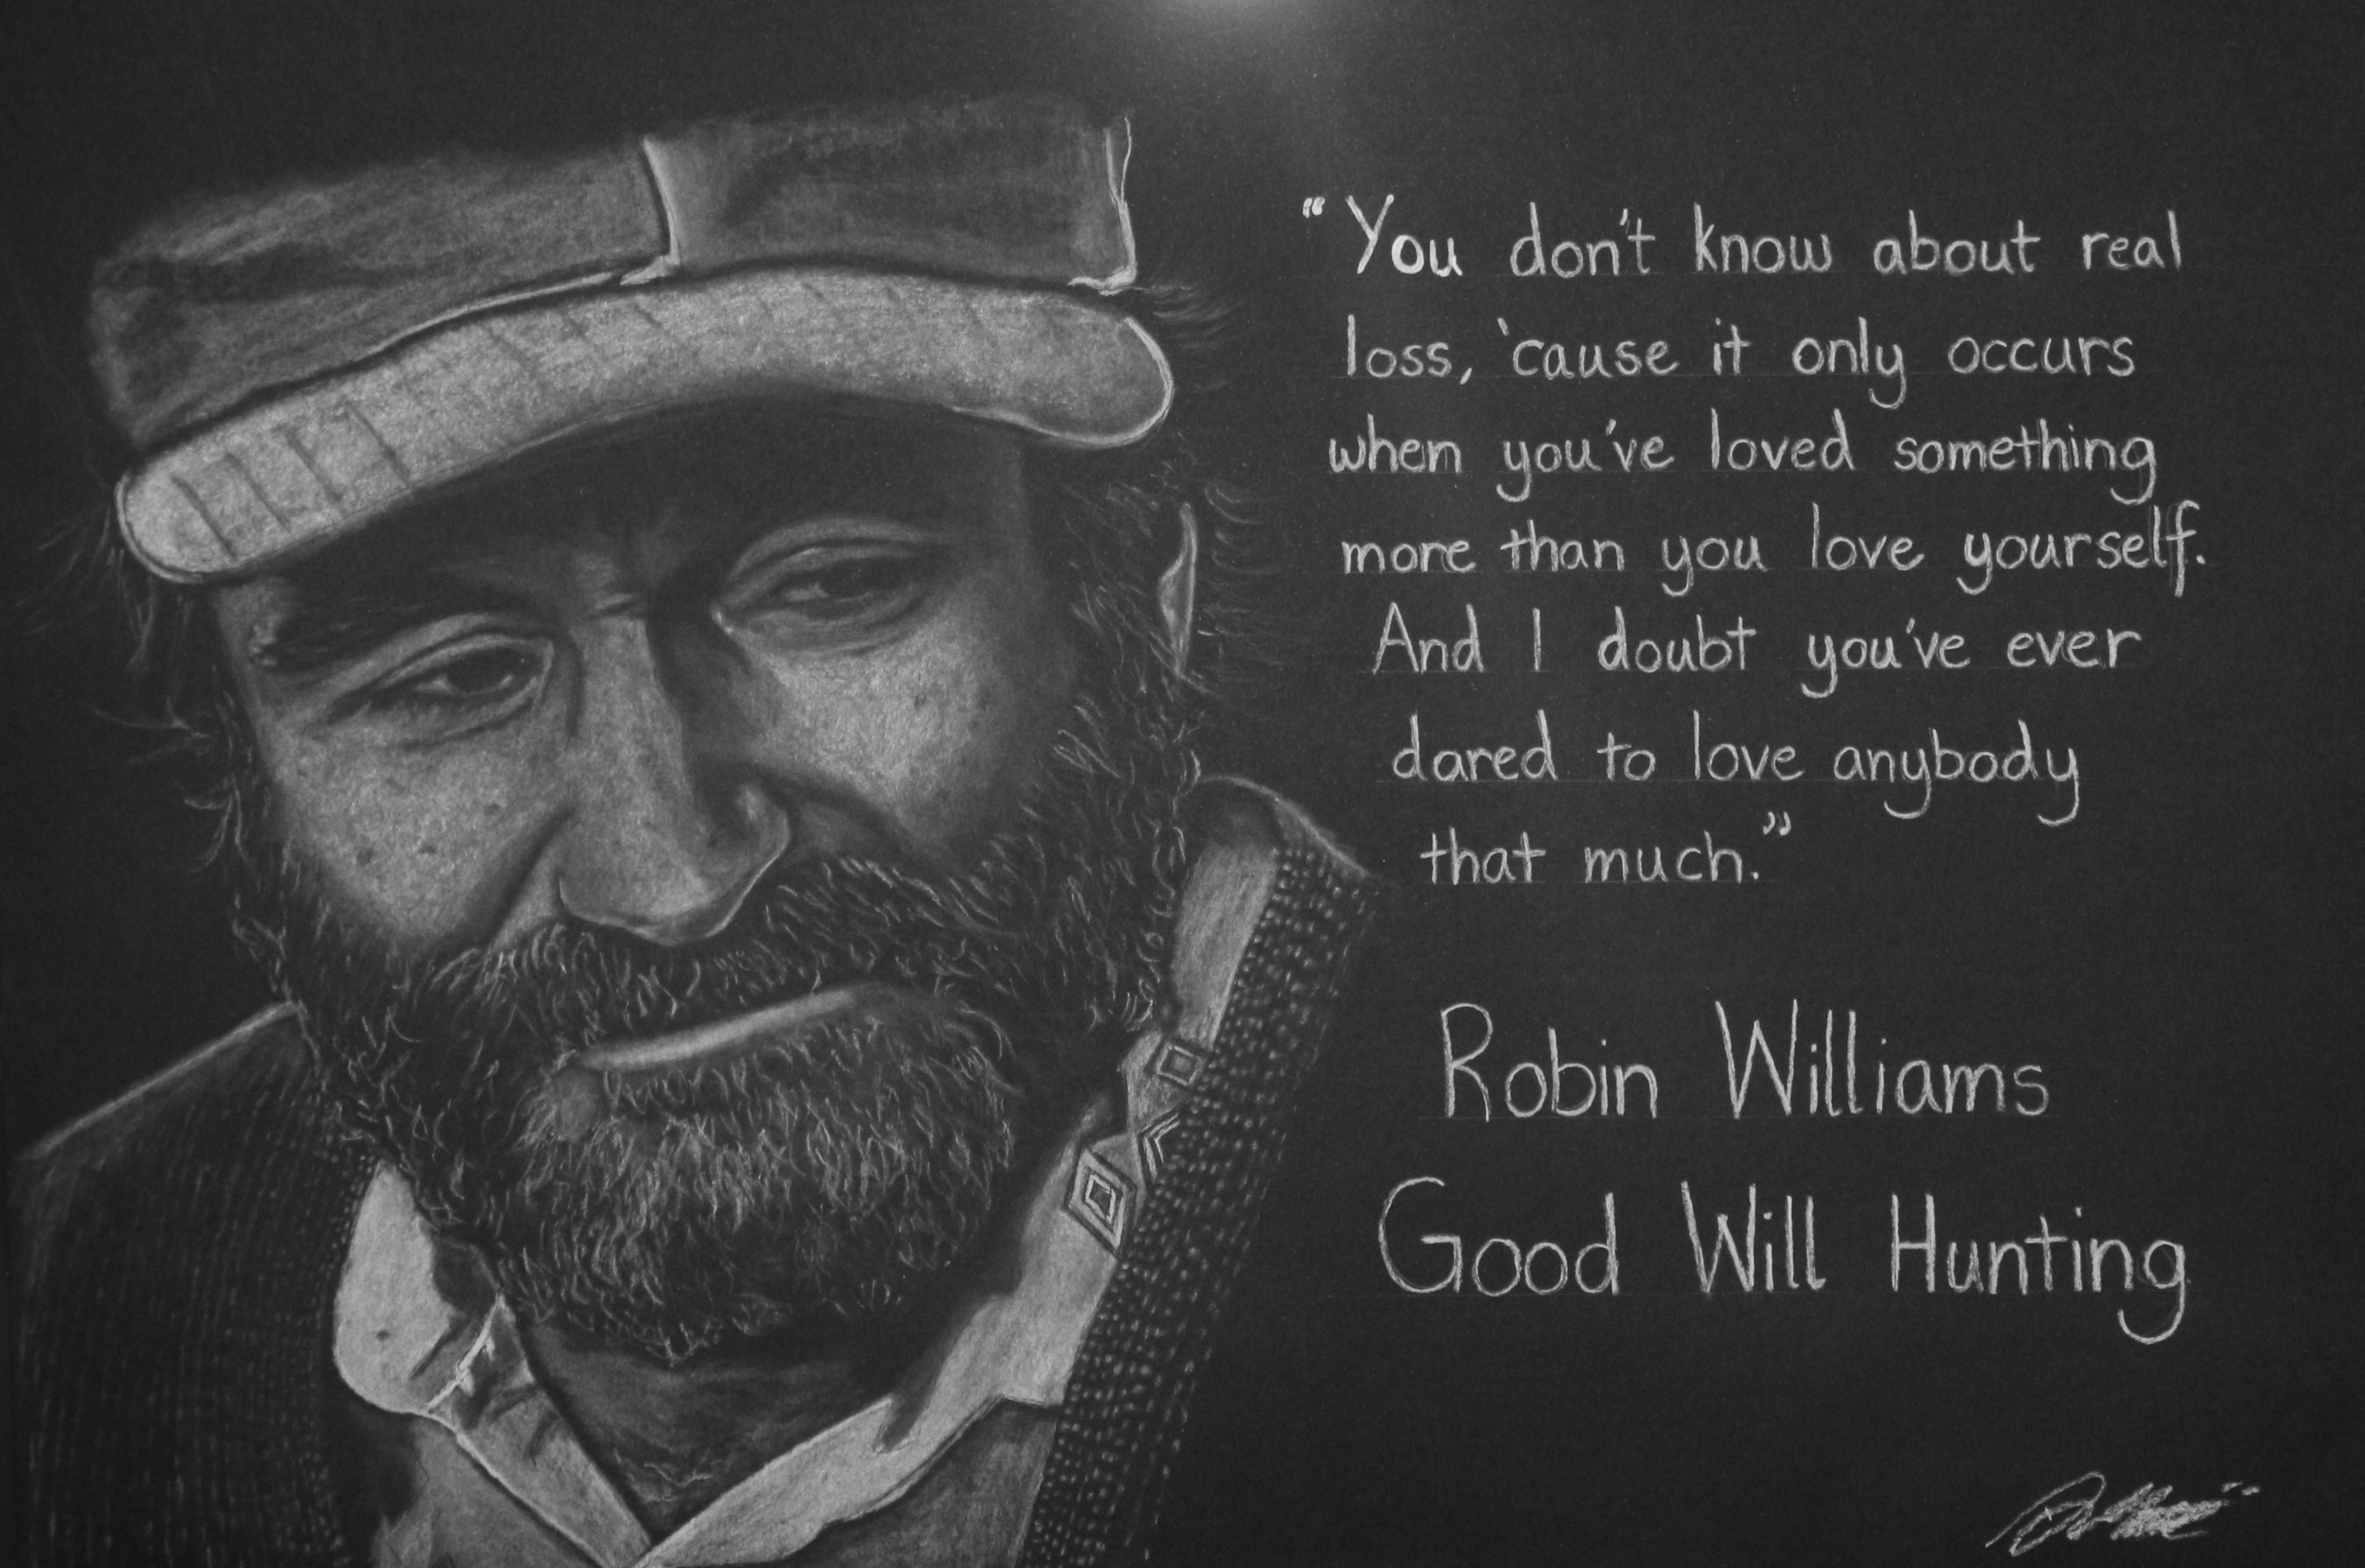 Robin Williams Good Will Hunting by Artists eye view